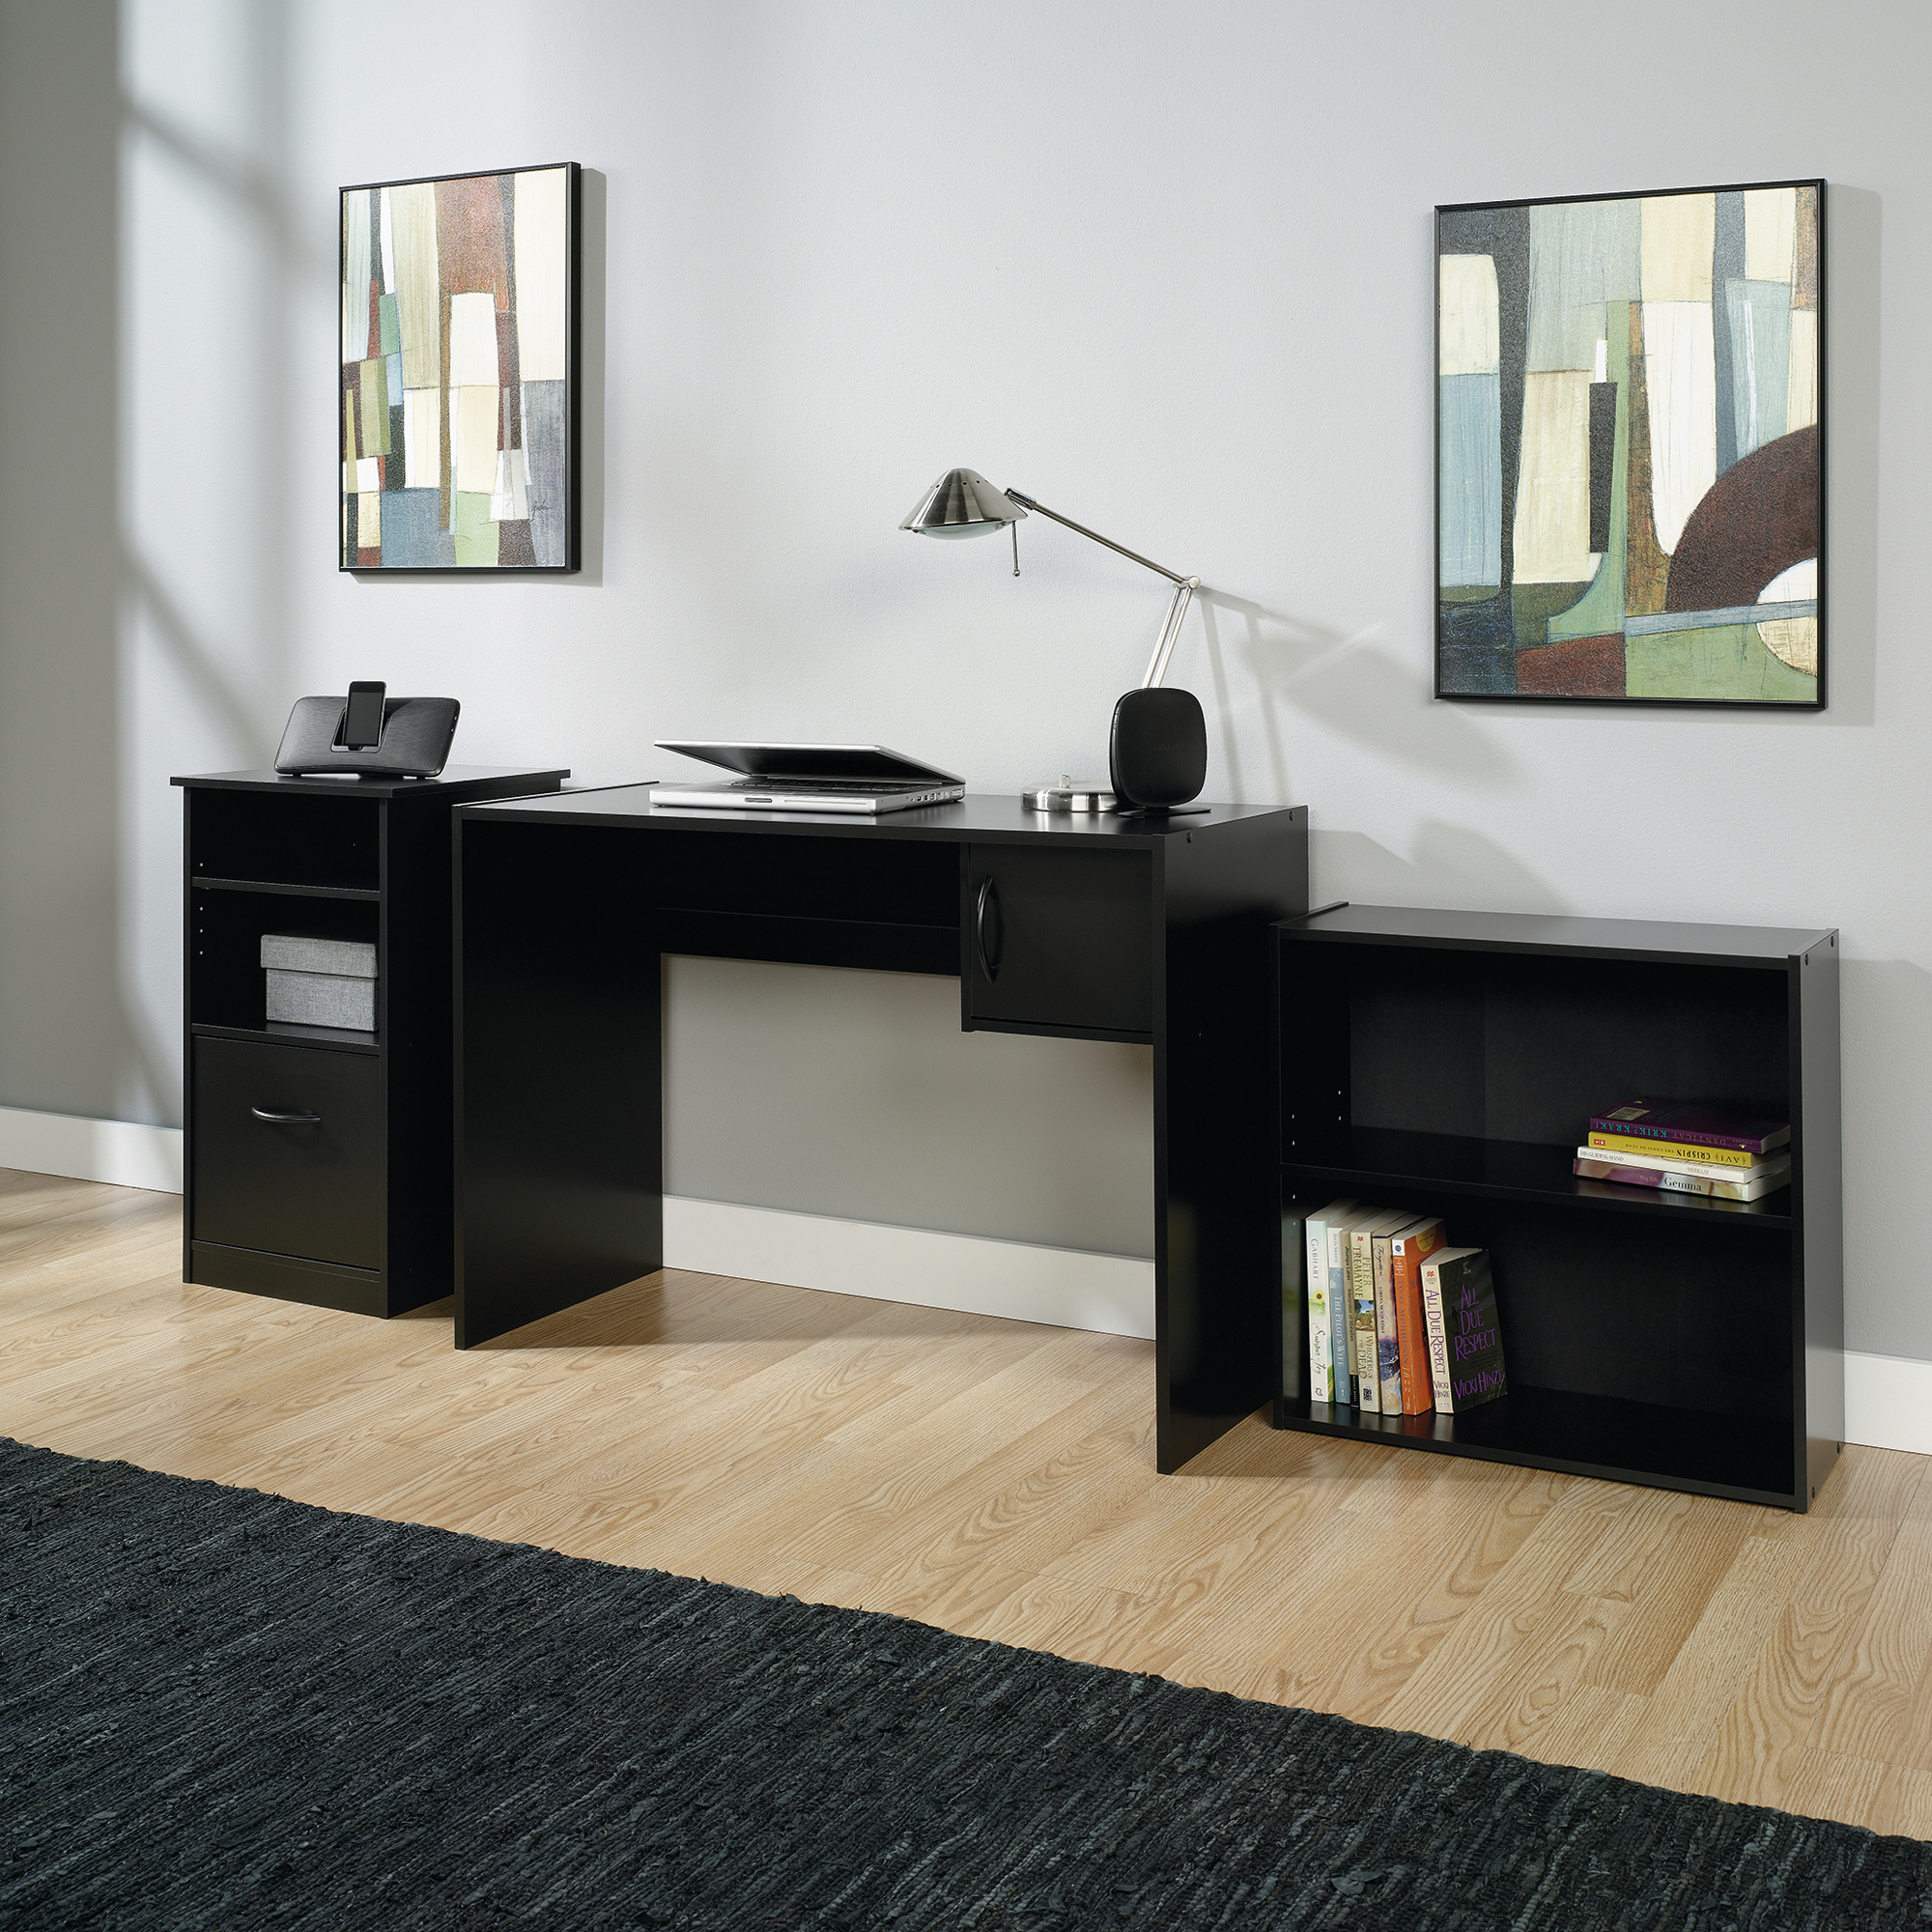 Mainstays 3-Piece Desk and Bookcase Office Set, Black Finish - image 1 of 6